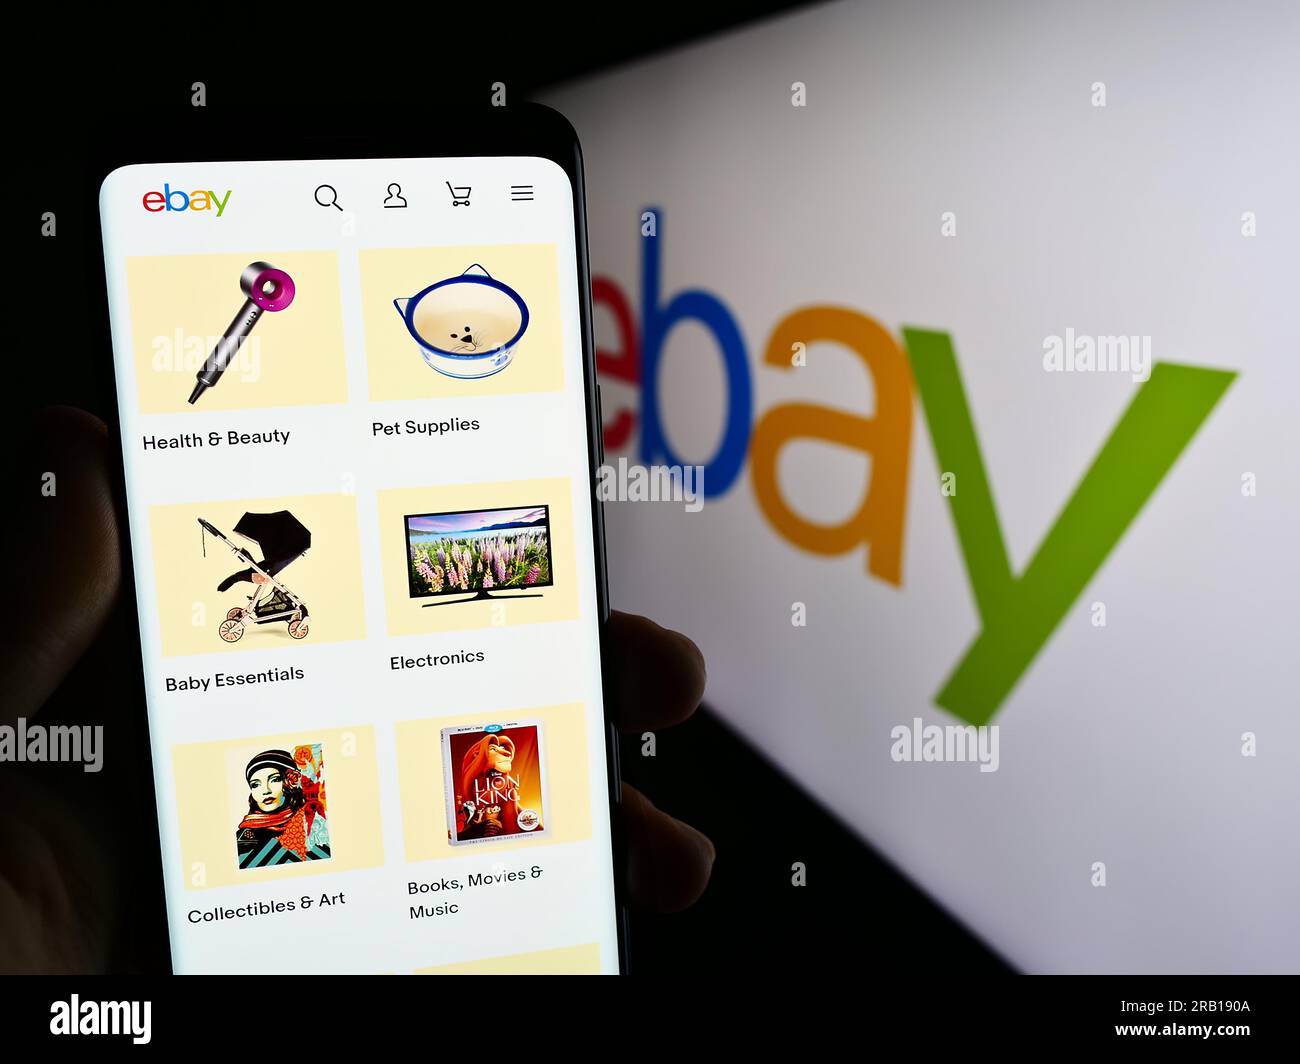 Person holding smartphone with web page of US e-commerce company eBay Inc. on screen in front of business logo. Focus on center of phone display. Stock Photo